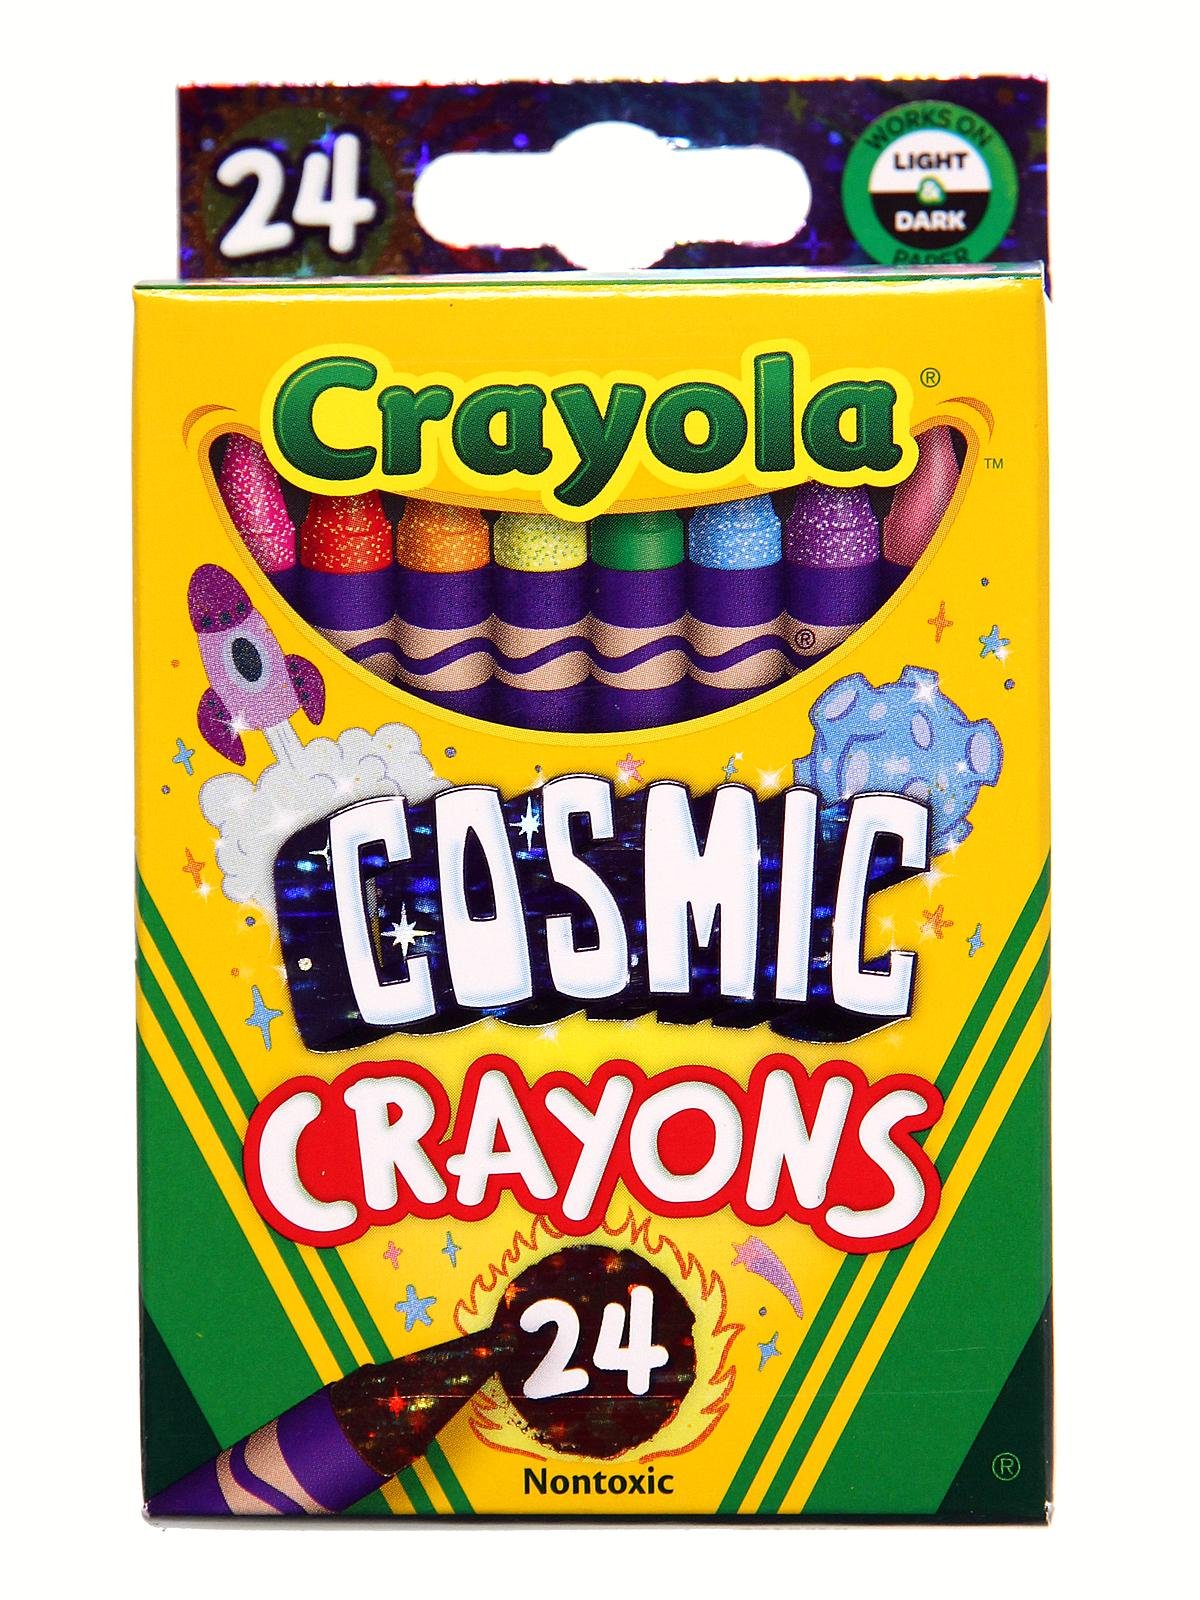 Crayola 24 Count Crayons per Box New in Package Set of 12